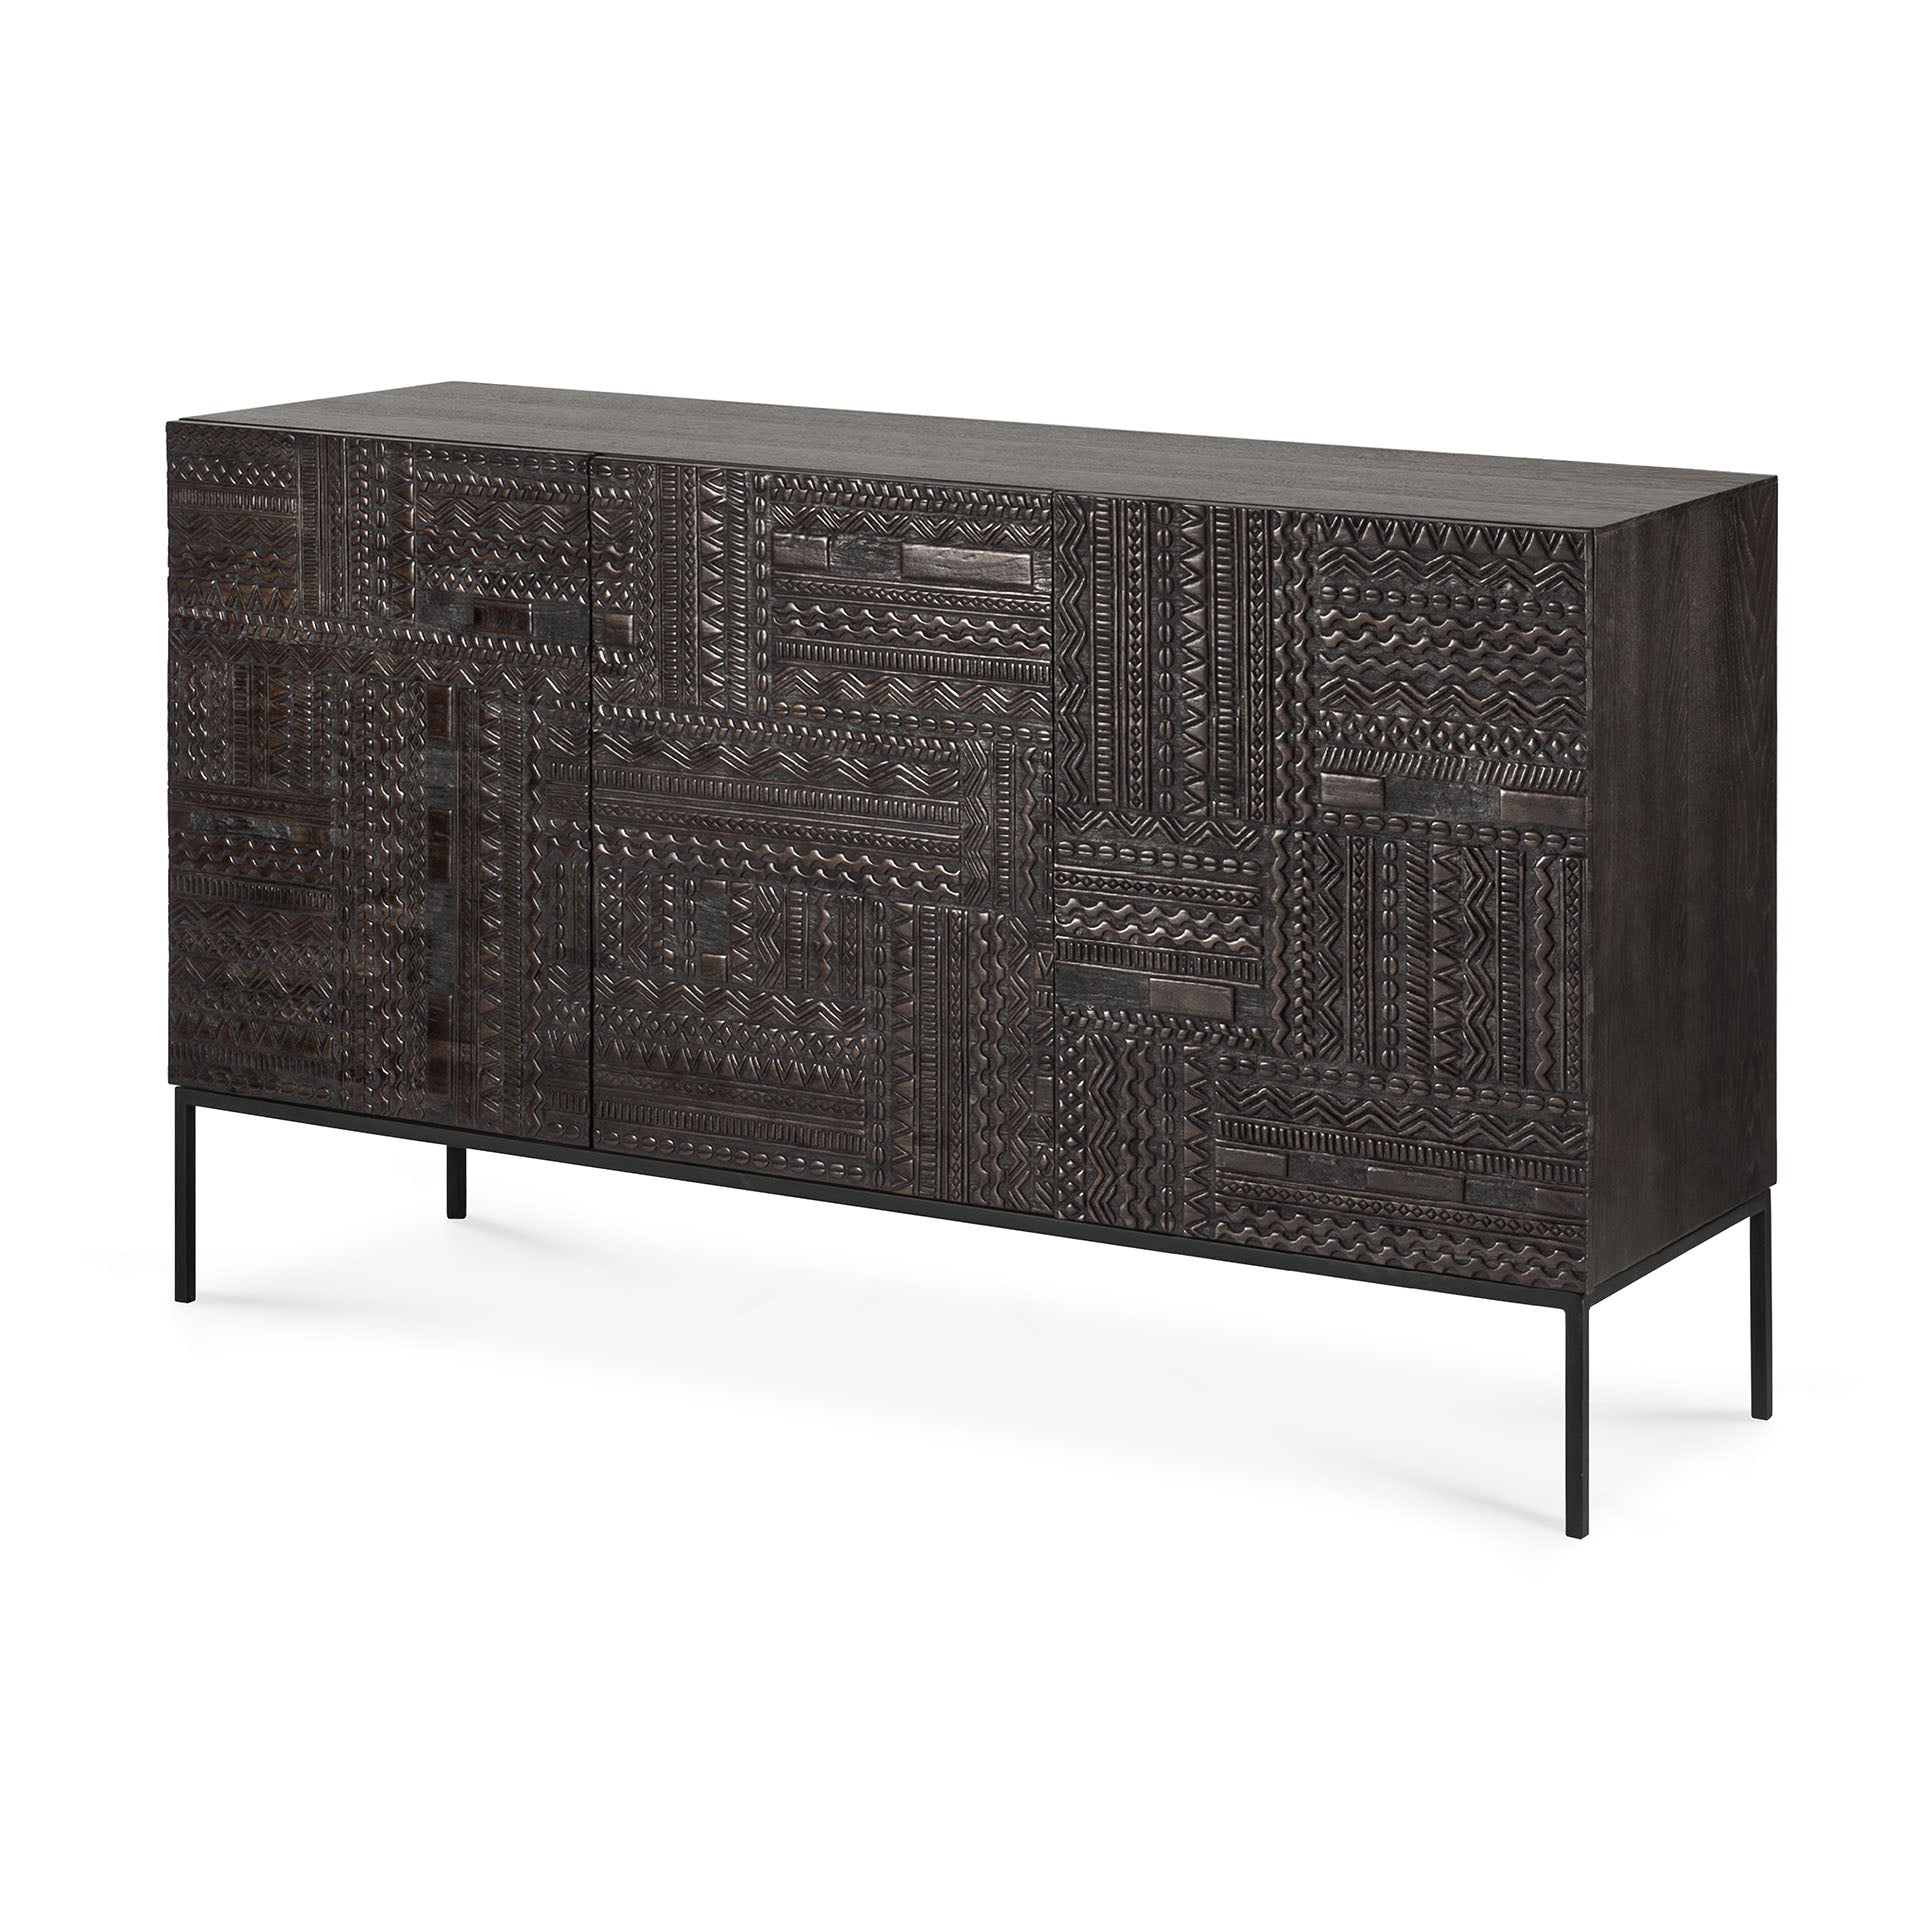 Ethnicraft Teak Ancestor Tabwa Sideboard Buffet is available from Make Your House A Home, Bendigo, Victoria, Australia